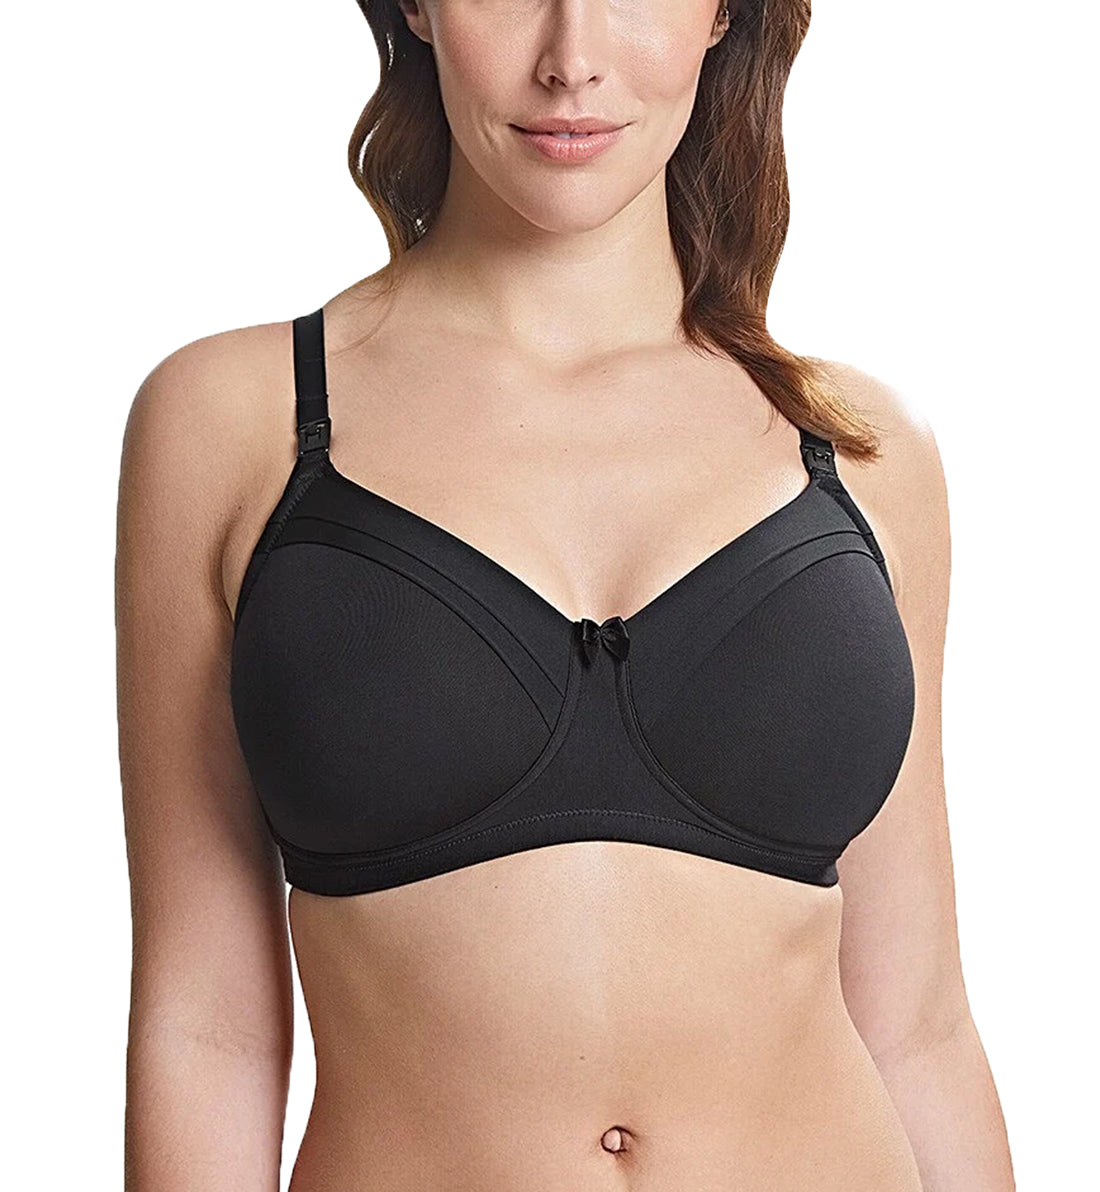 Royce Lingerie adds a new colourway to the Blossom Nursing Bra